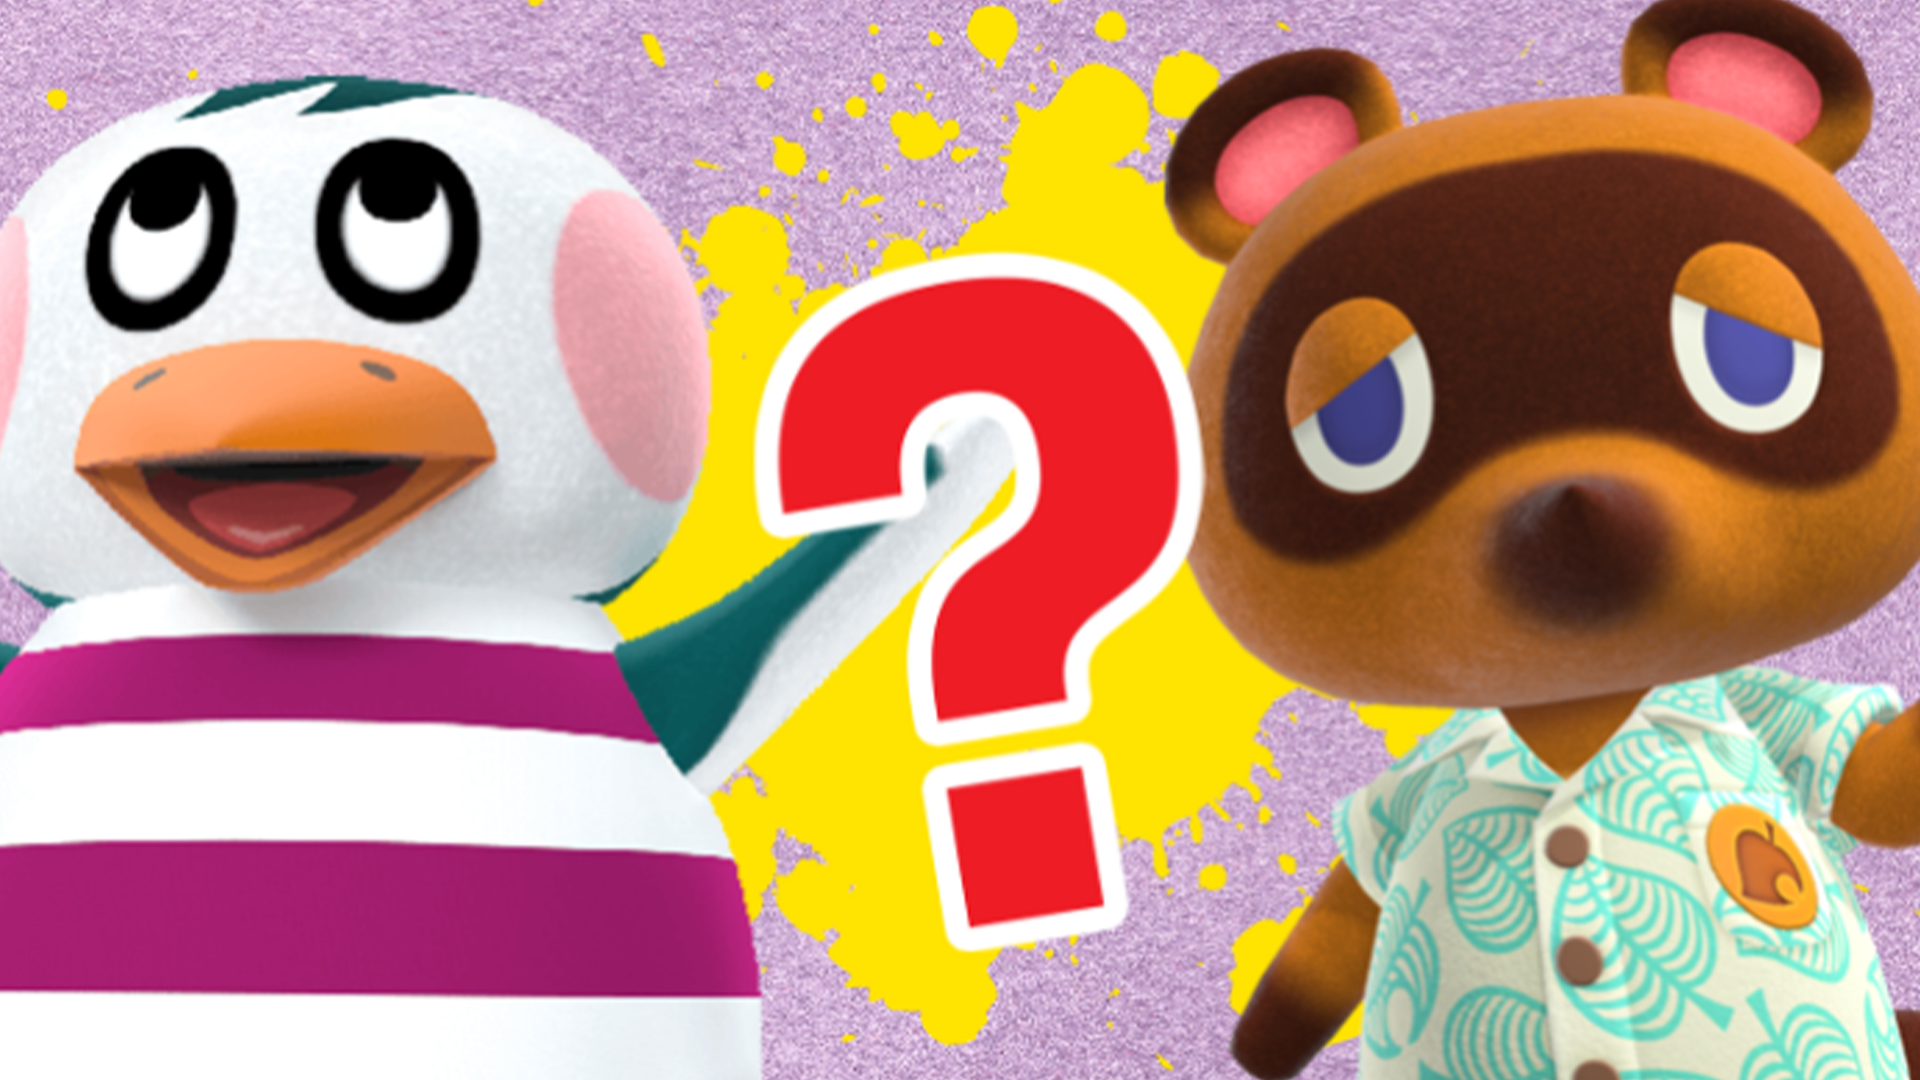 Which Animal Crossing Villager Are You? | Animal Crossing Quiz